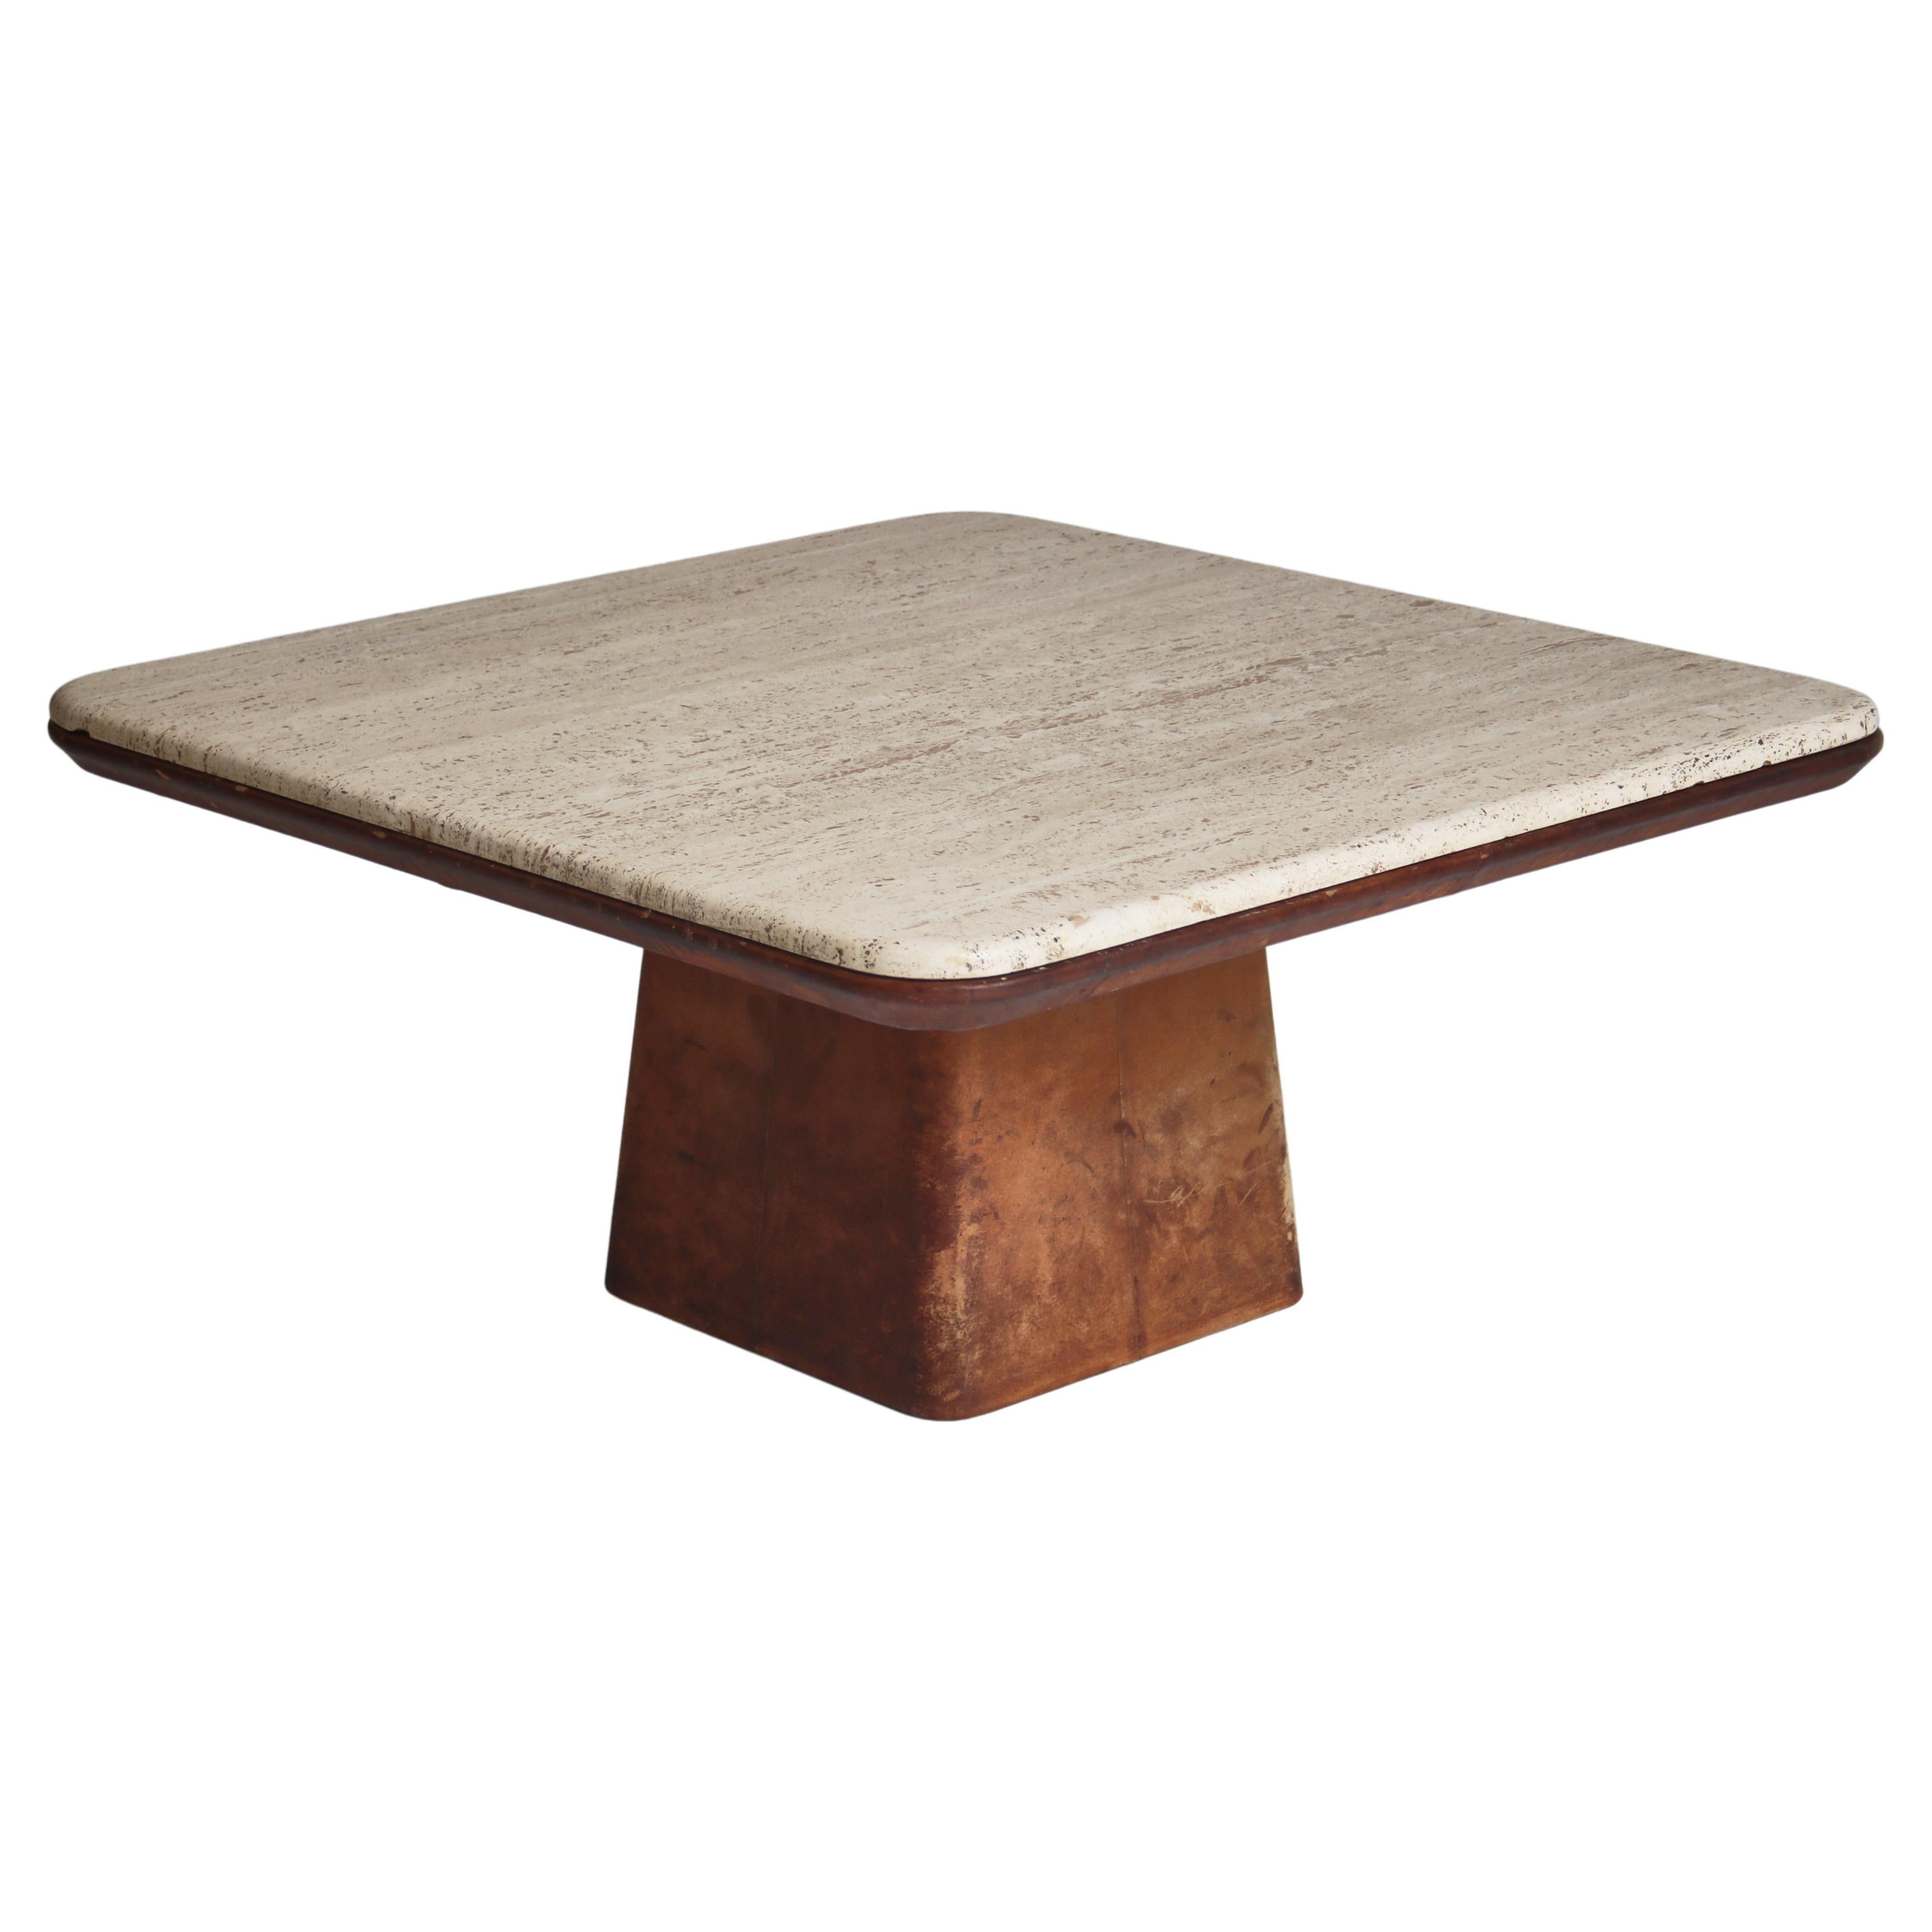 Large De Sede coffee Table in Travertine and Natural Leather, Switzerland, 1970s For Sale